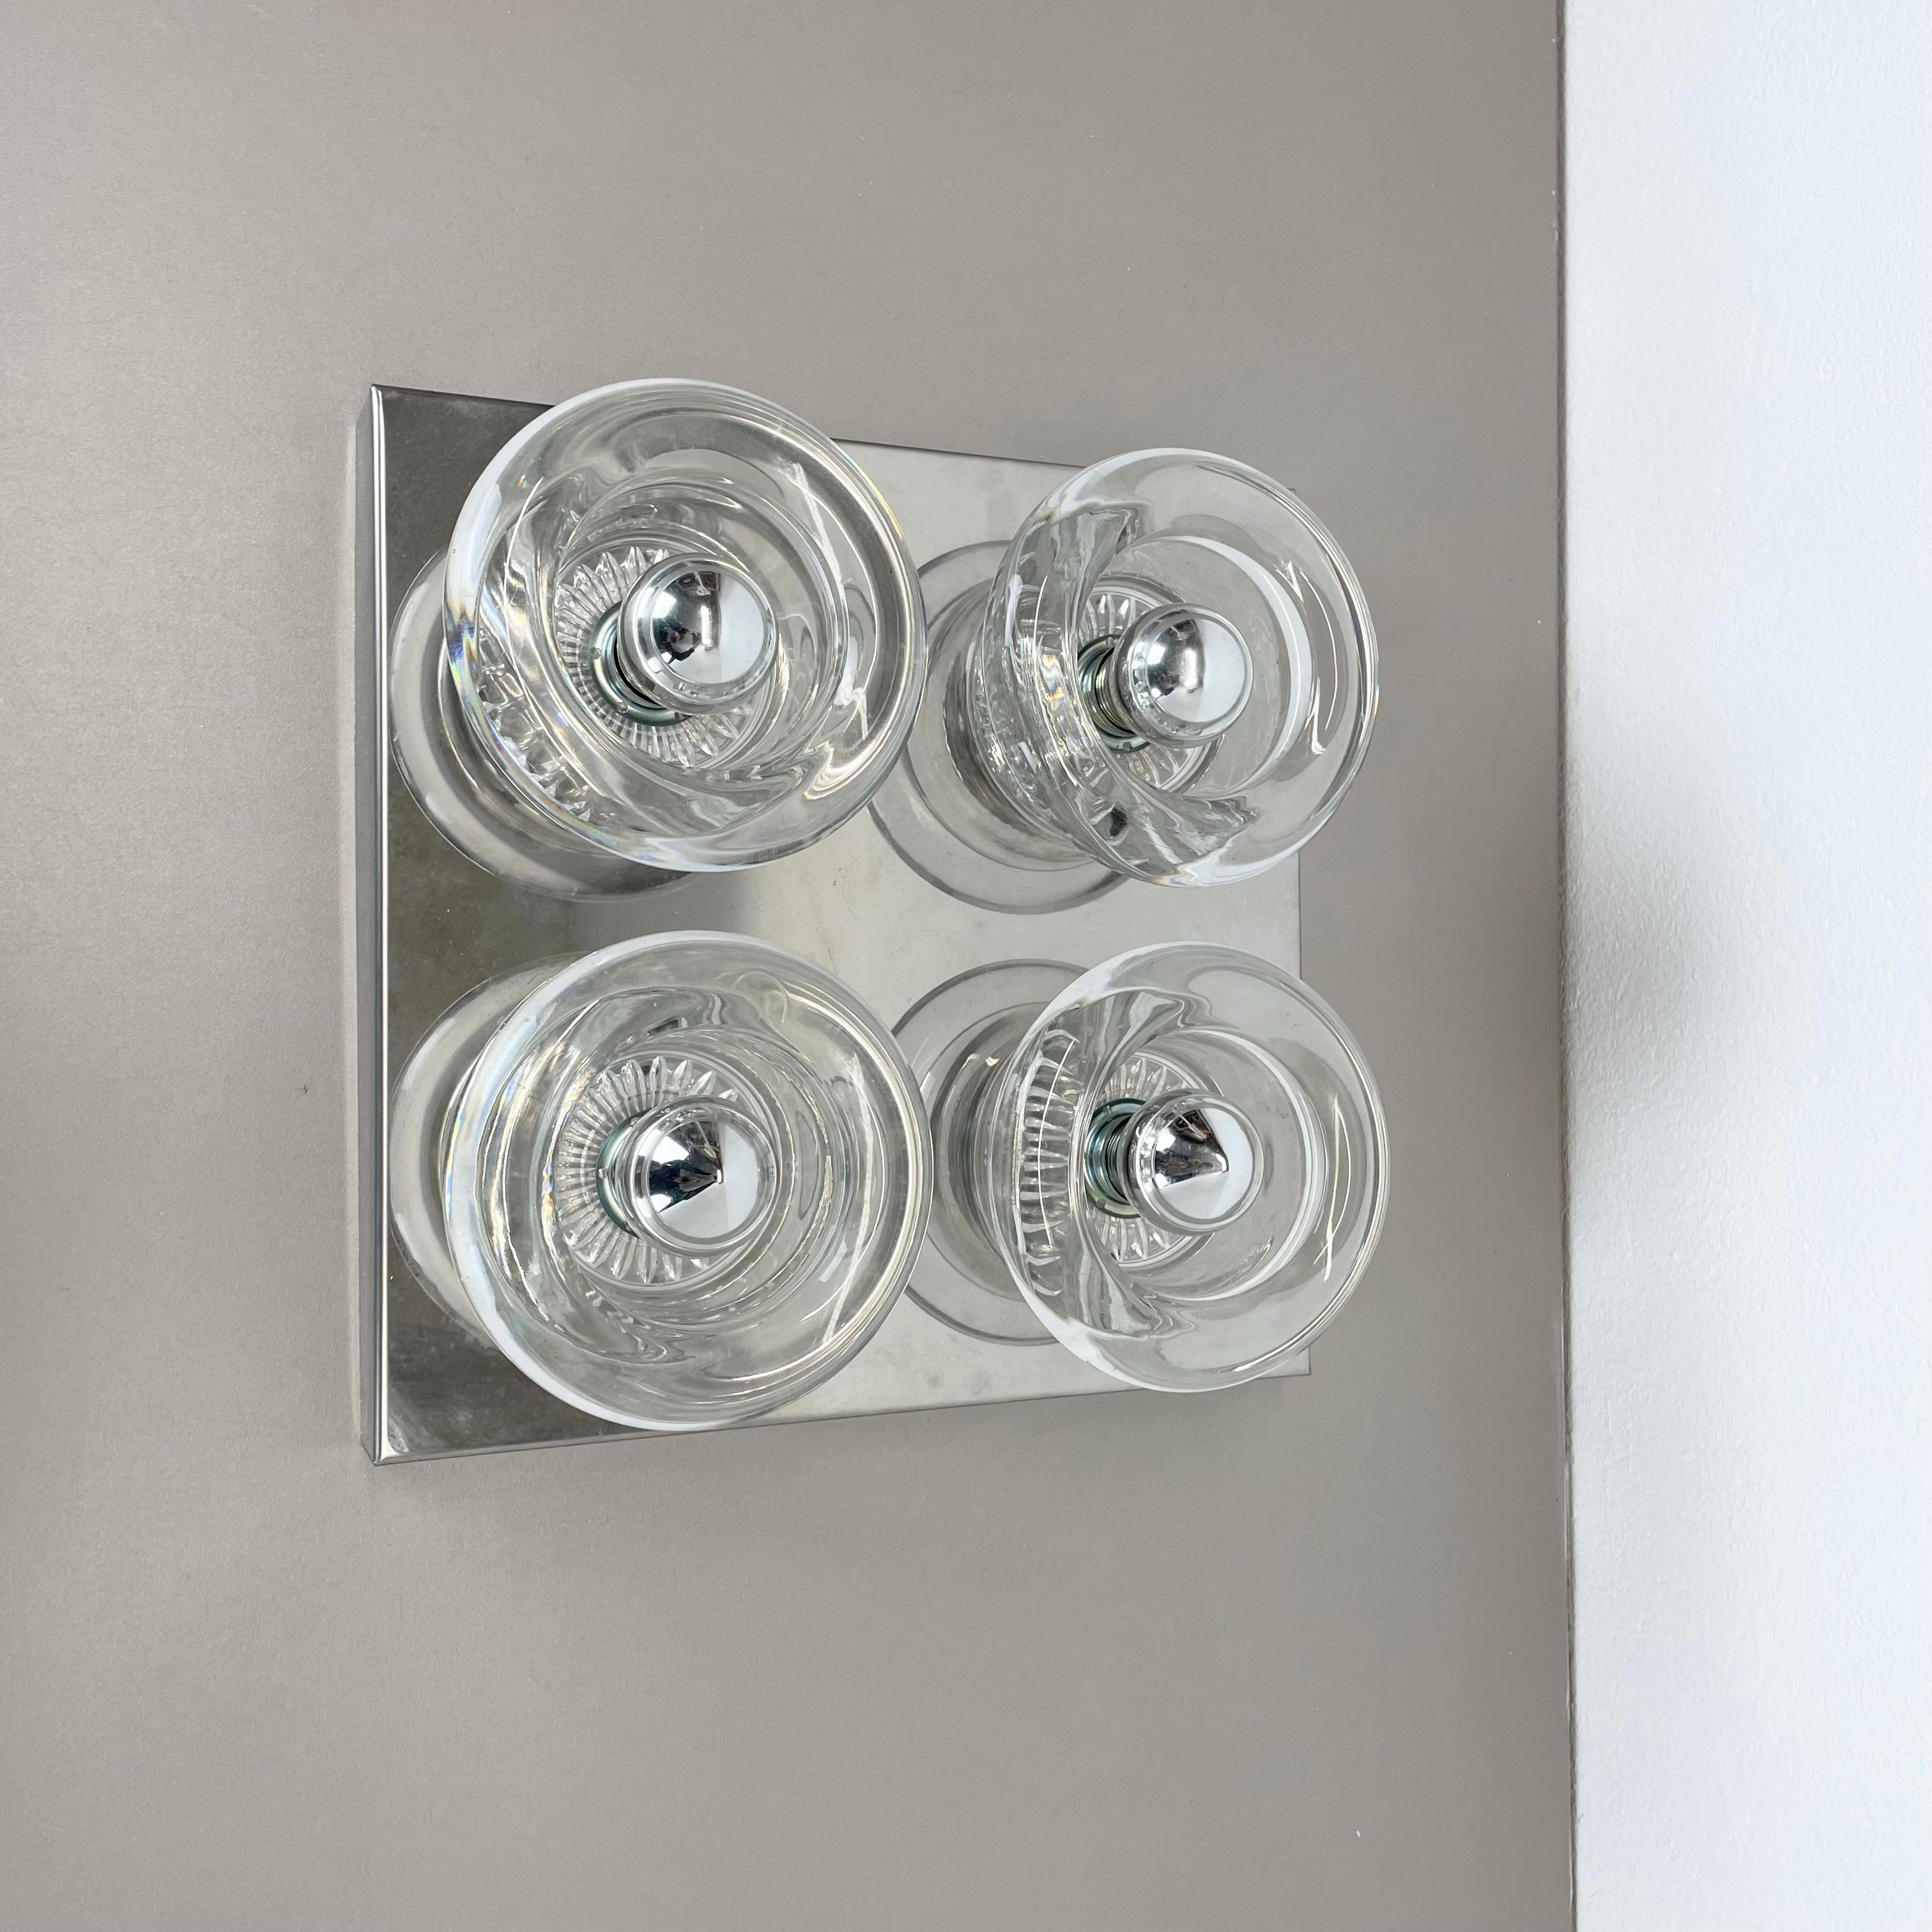 ARTICLE:

wall  ceiling light


PRODUCER:

COSACK Lights, Germany (see label)


ORIGIN:

Germany


AGE:

1970s




DESCRIPTION:

original 70s modernist wall Light with 4 glass lighting elements. this light was designed and produced by Cosack Lights,